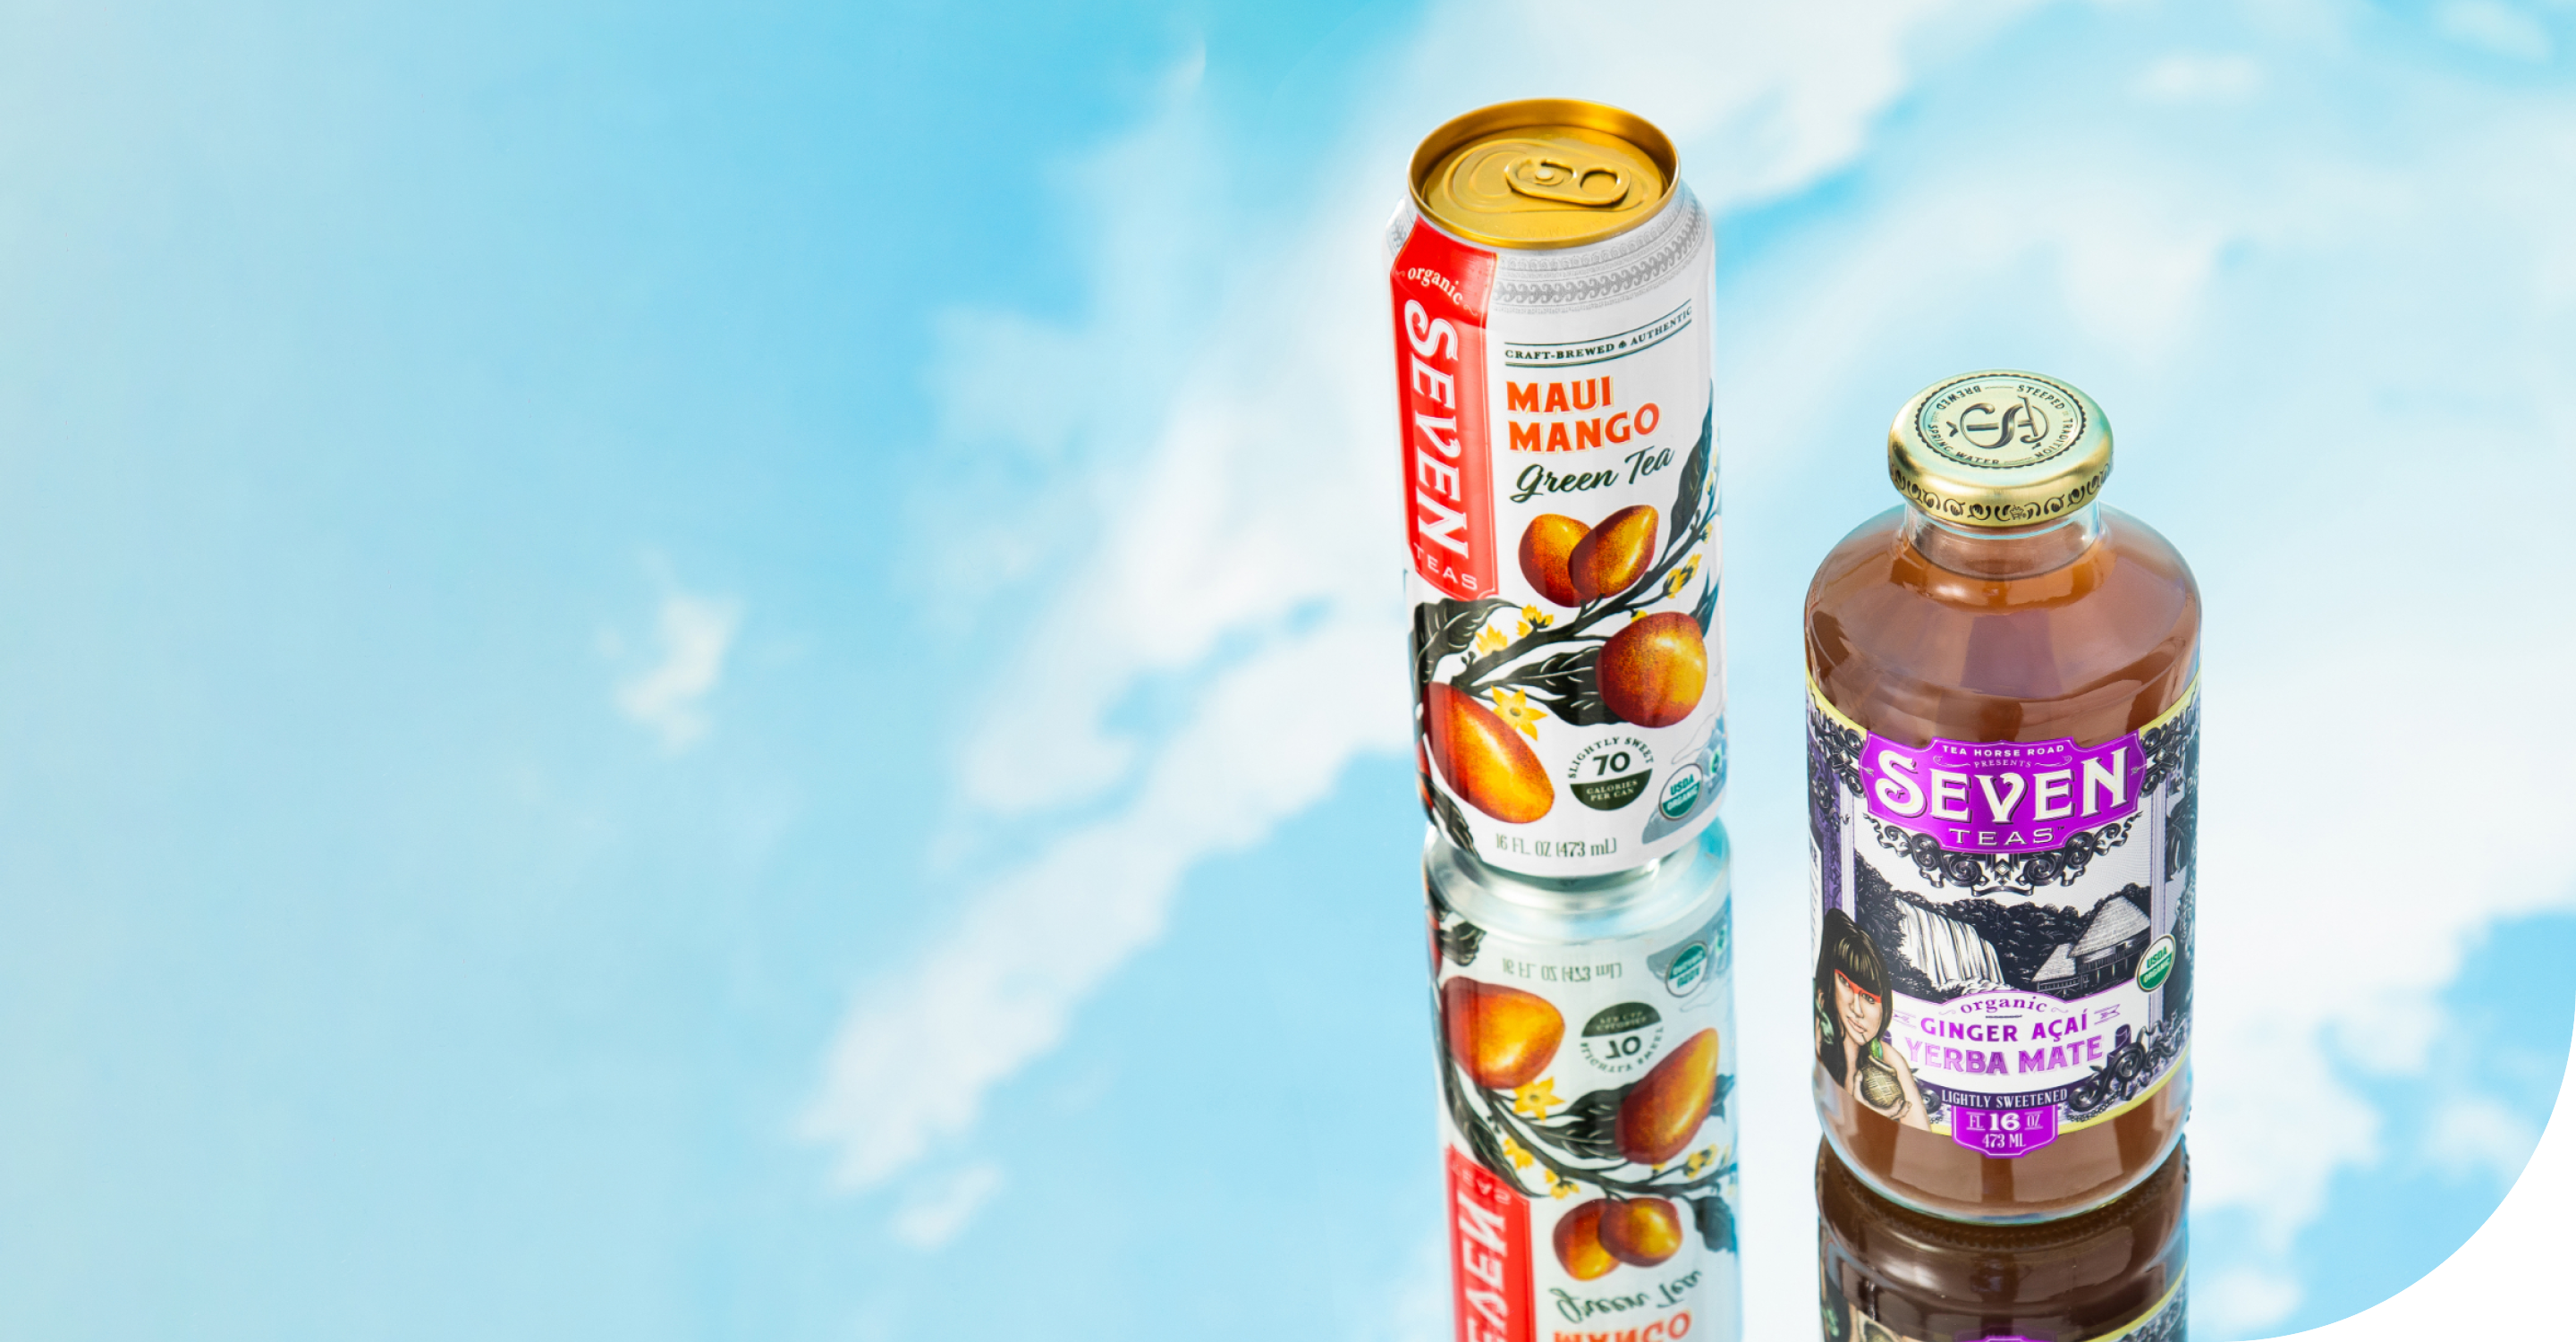 image of banner cans and glass product with sky background